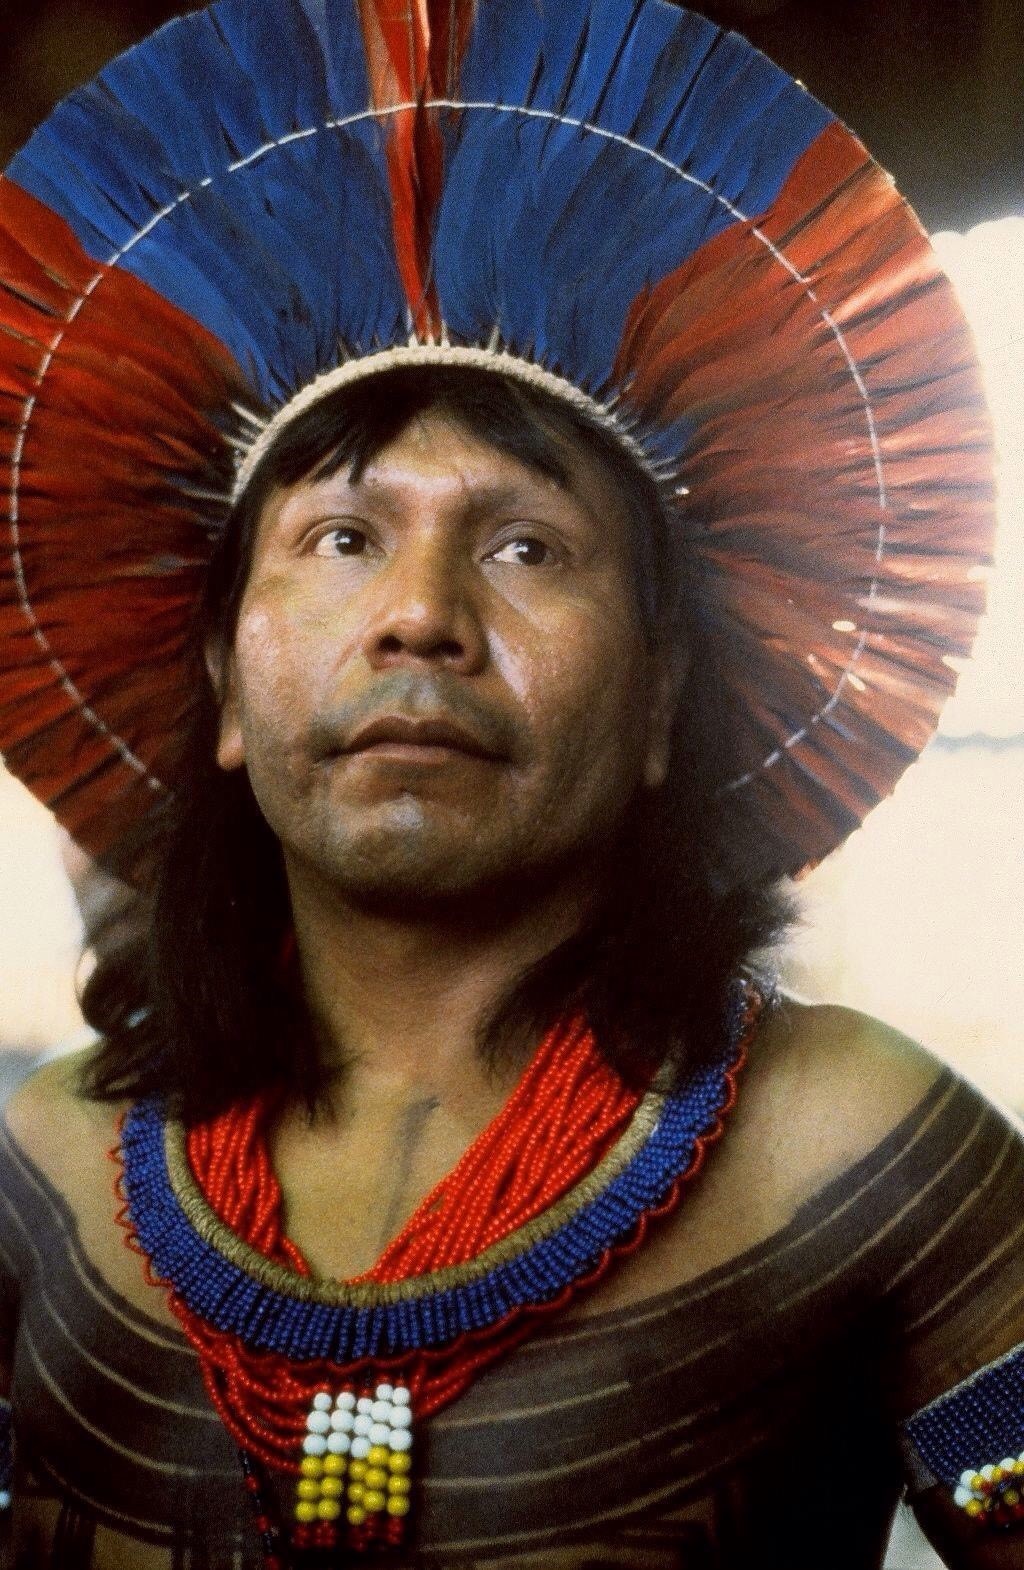 Cacique Panara, indigenous chief of the Kayapo tribe of the state